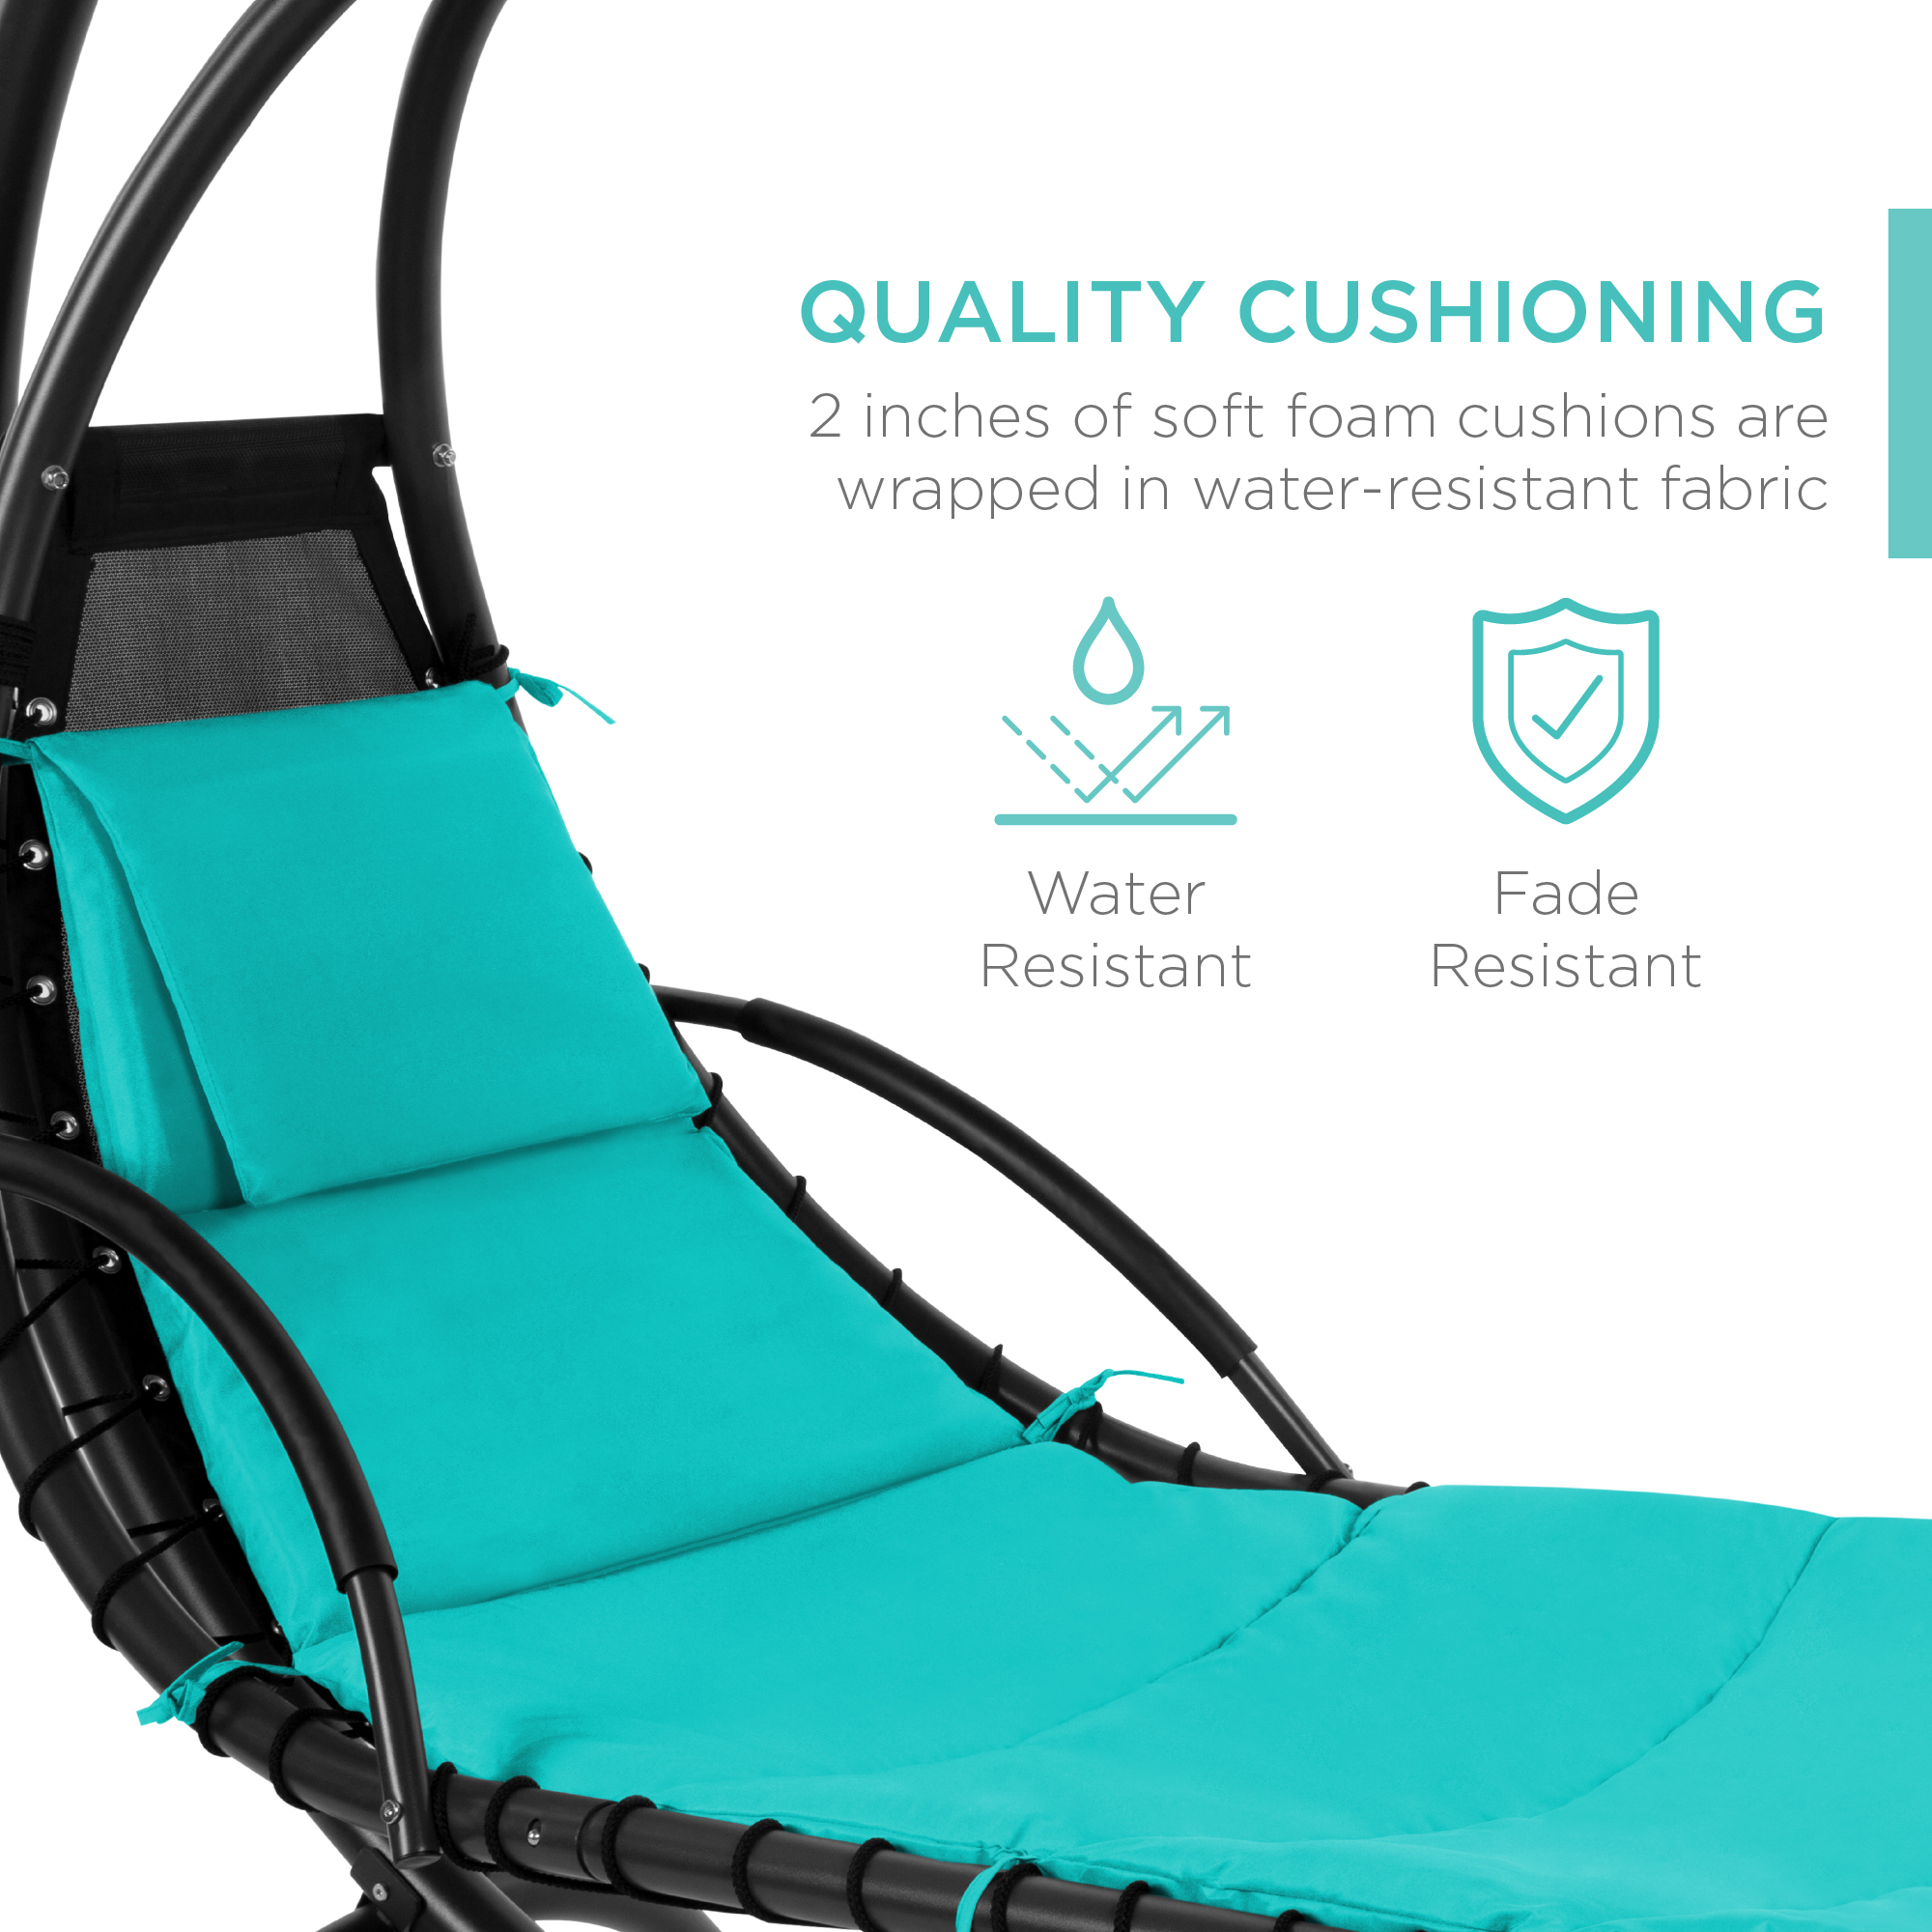 Best Choice Products Hanging Curved Chaise Lounge Chair Swing for Backyard, Patio w/ Pillow, Shade, Stand - Teal - image 5 of 8